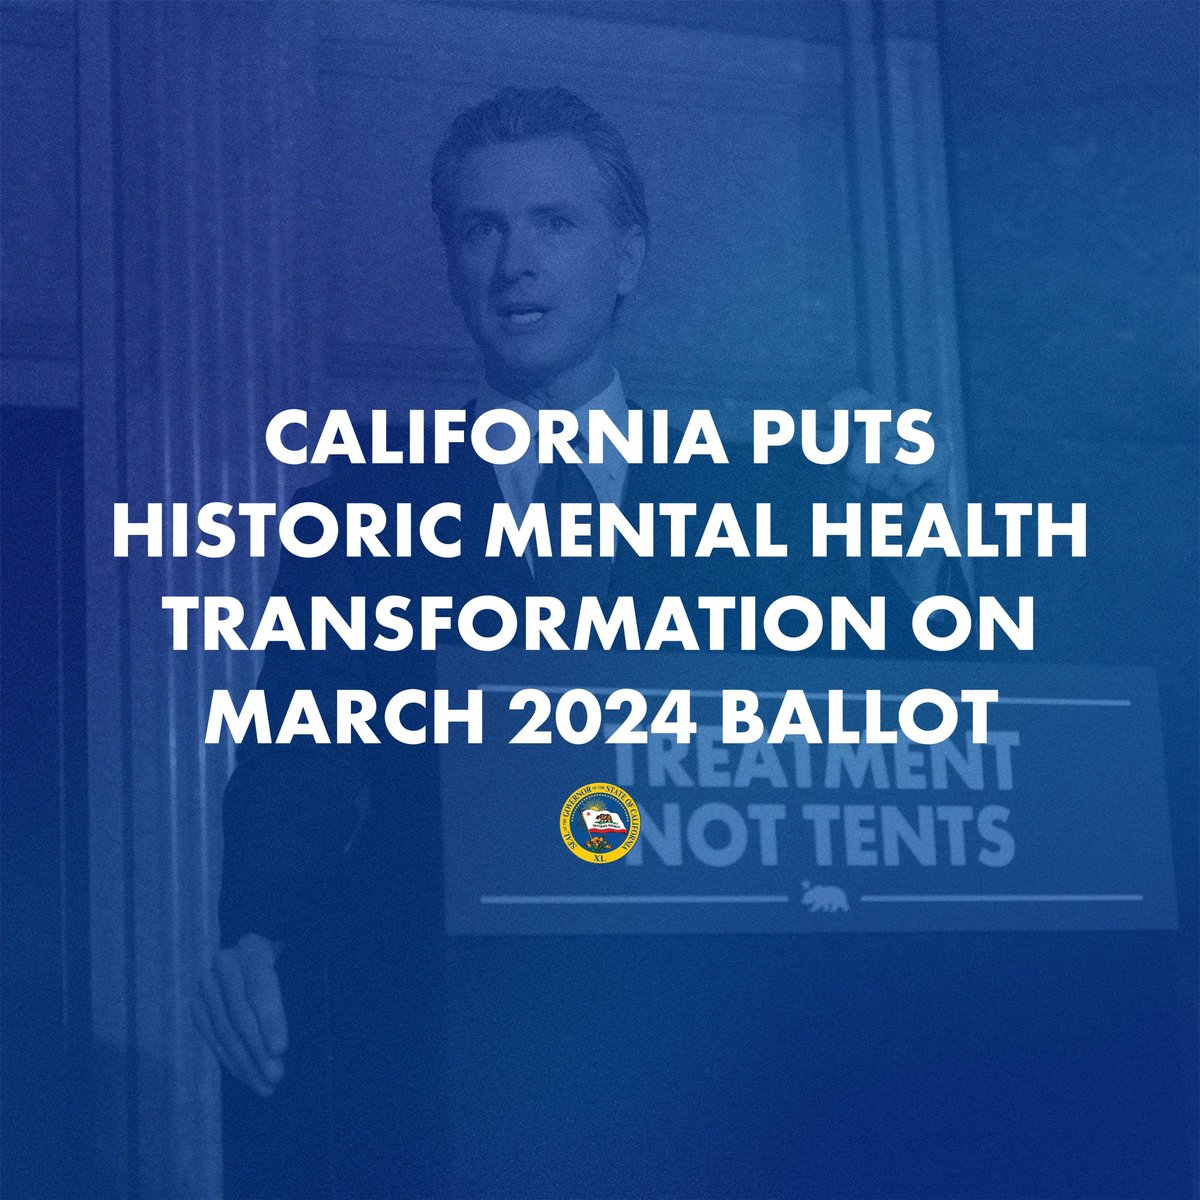 California is working to ensure those with serious behavioral health issues get the care they need. With a modernized Mental Health Services Act & new behavioral health beds & treatment slots, we're making good on promises made decades ago – with accountability for real results.